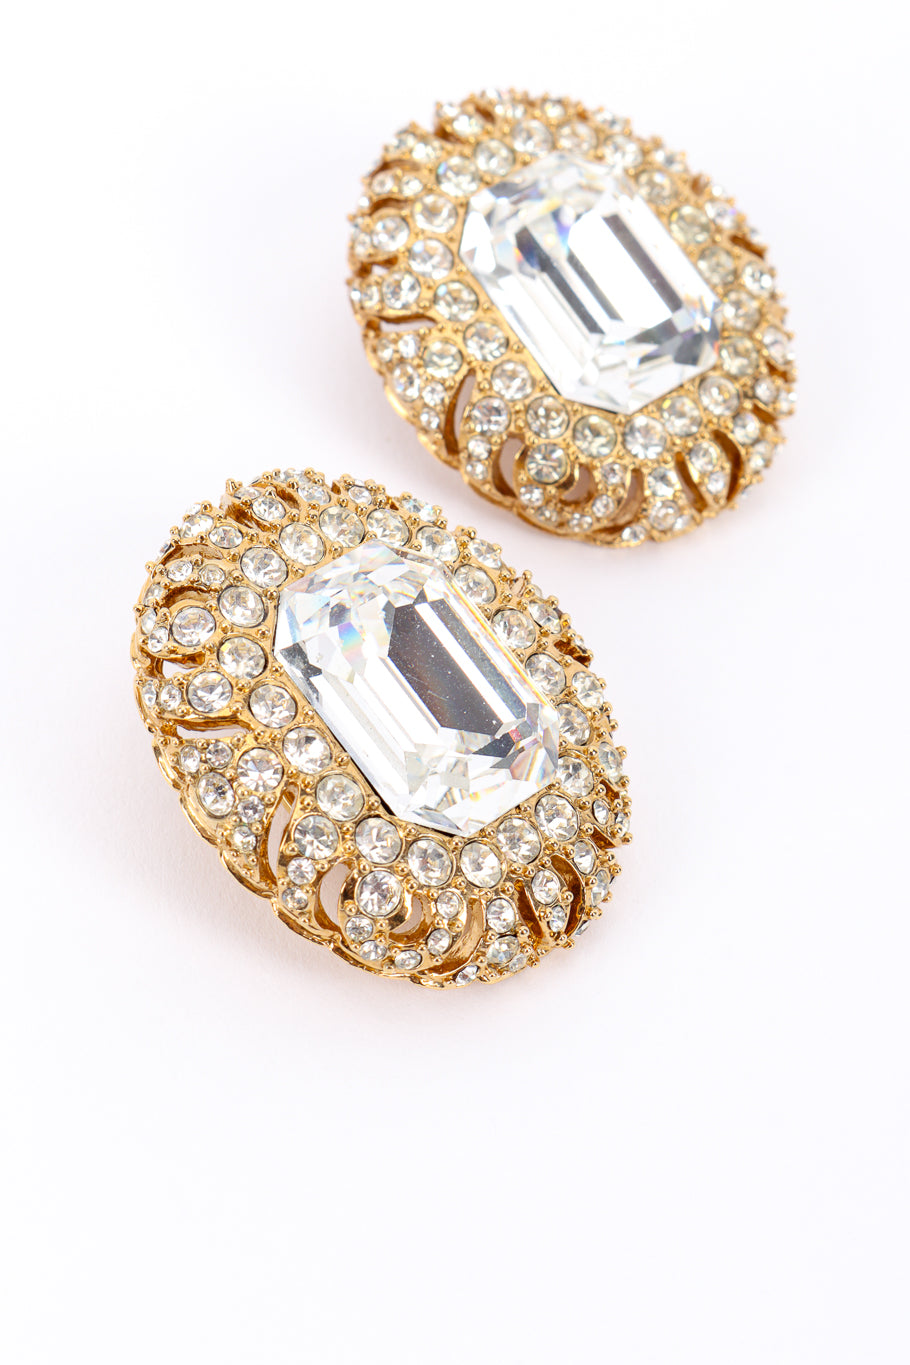 Vintage Givenchy Oval Crystal Gem Earrings front 3/4 closeup @recessla